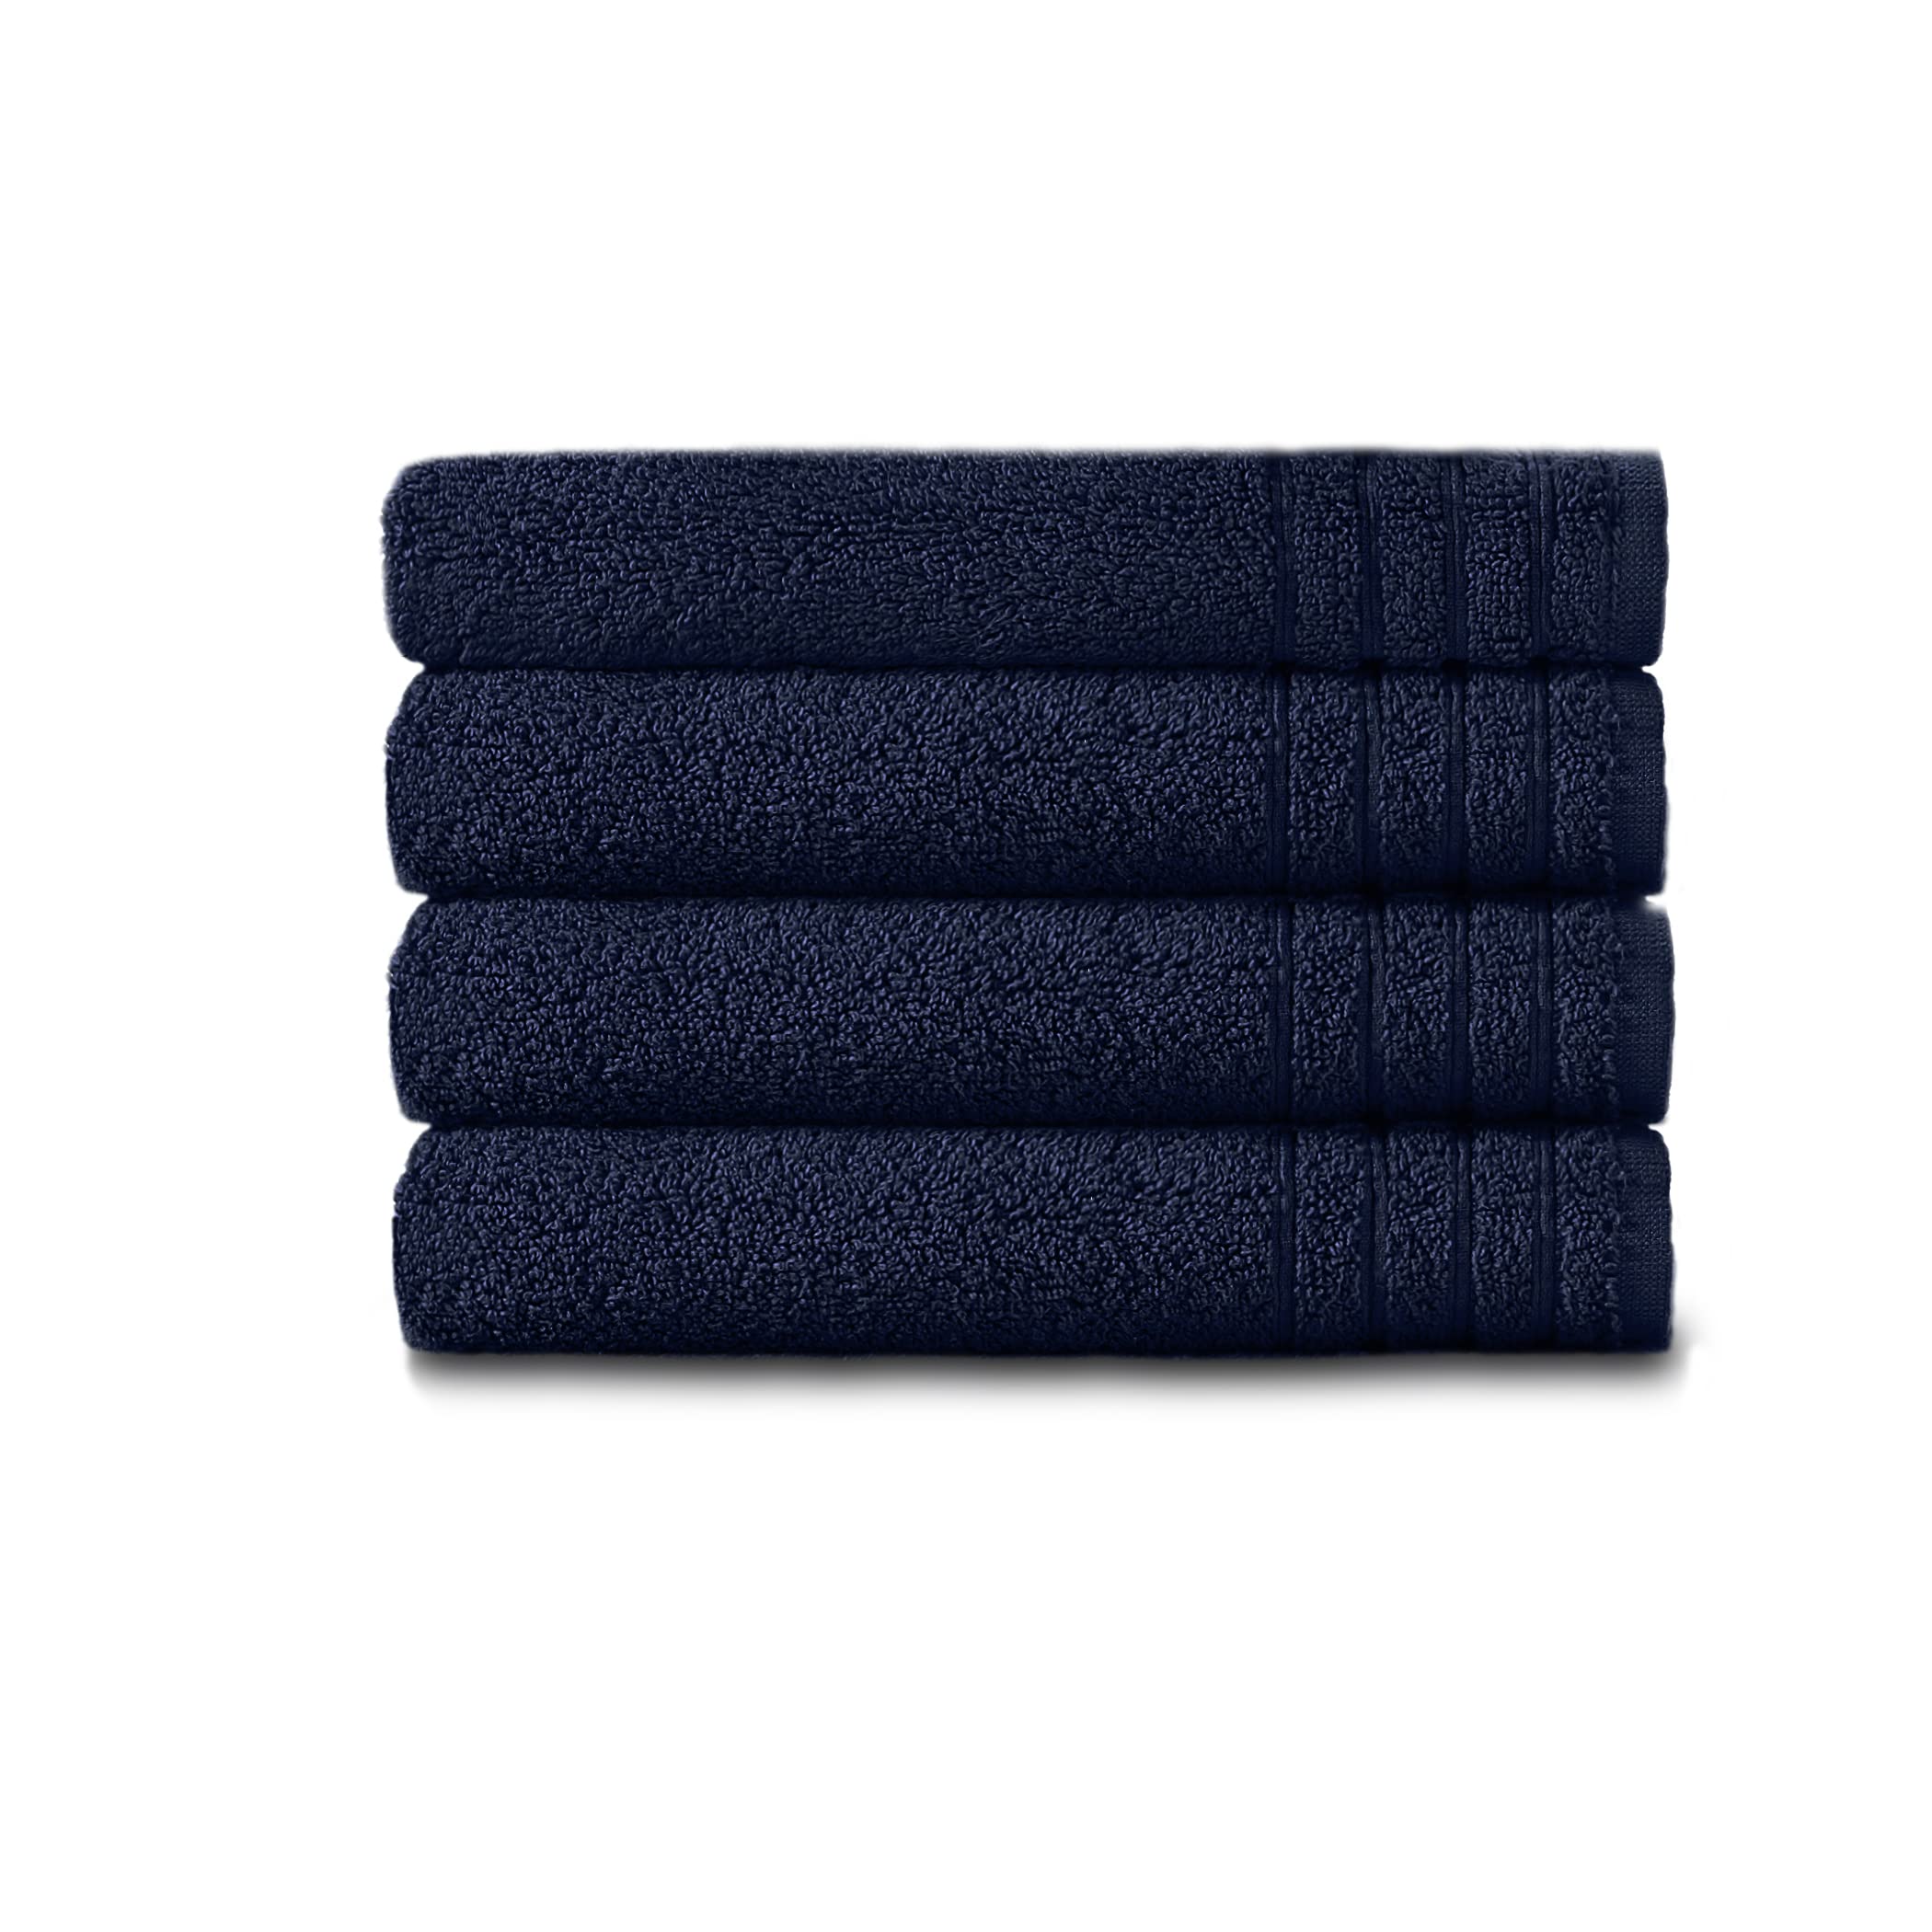 Book Cover COTTON CRAFT Hand Towel - 4 Pack Super Zero Twist 100% Cotton Face Towels - Ultra Soft Absorbent Low Lint Durable Everyday Luxury Hotel Spa Shower Pool Gym Dorm - 615 GSM - Oversized 16x30 - Navy Blue Navy 4 Pack Hand Towel